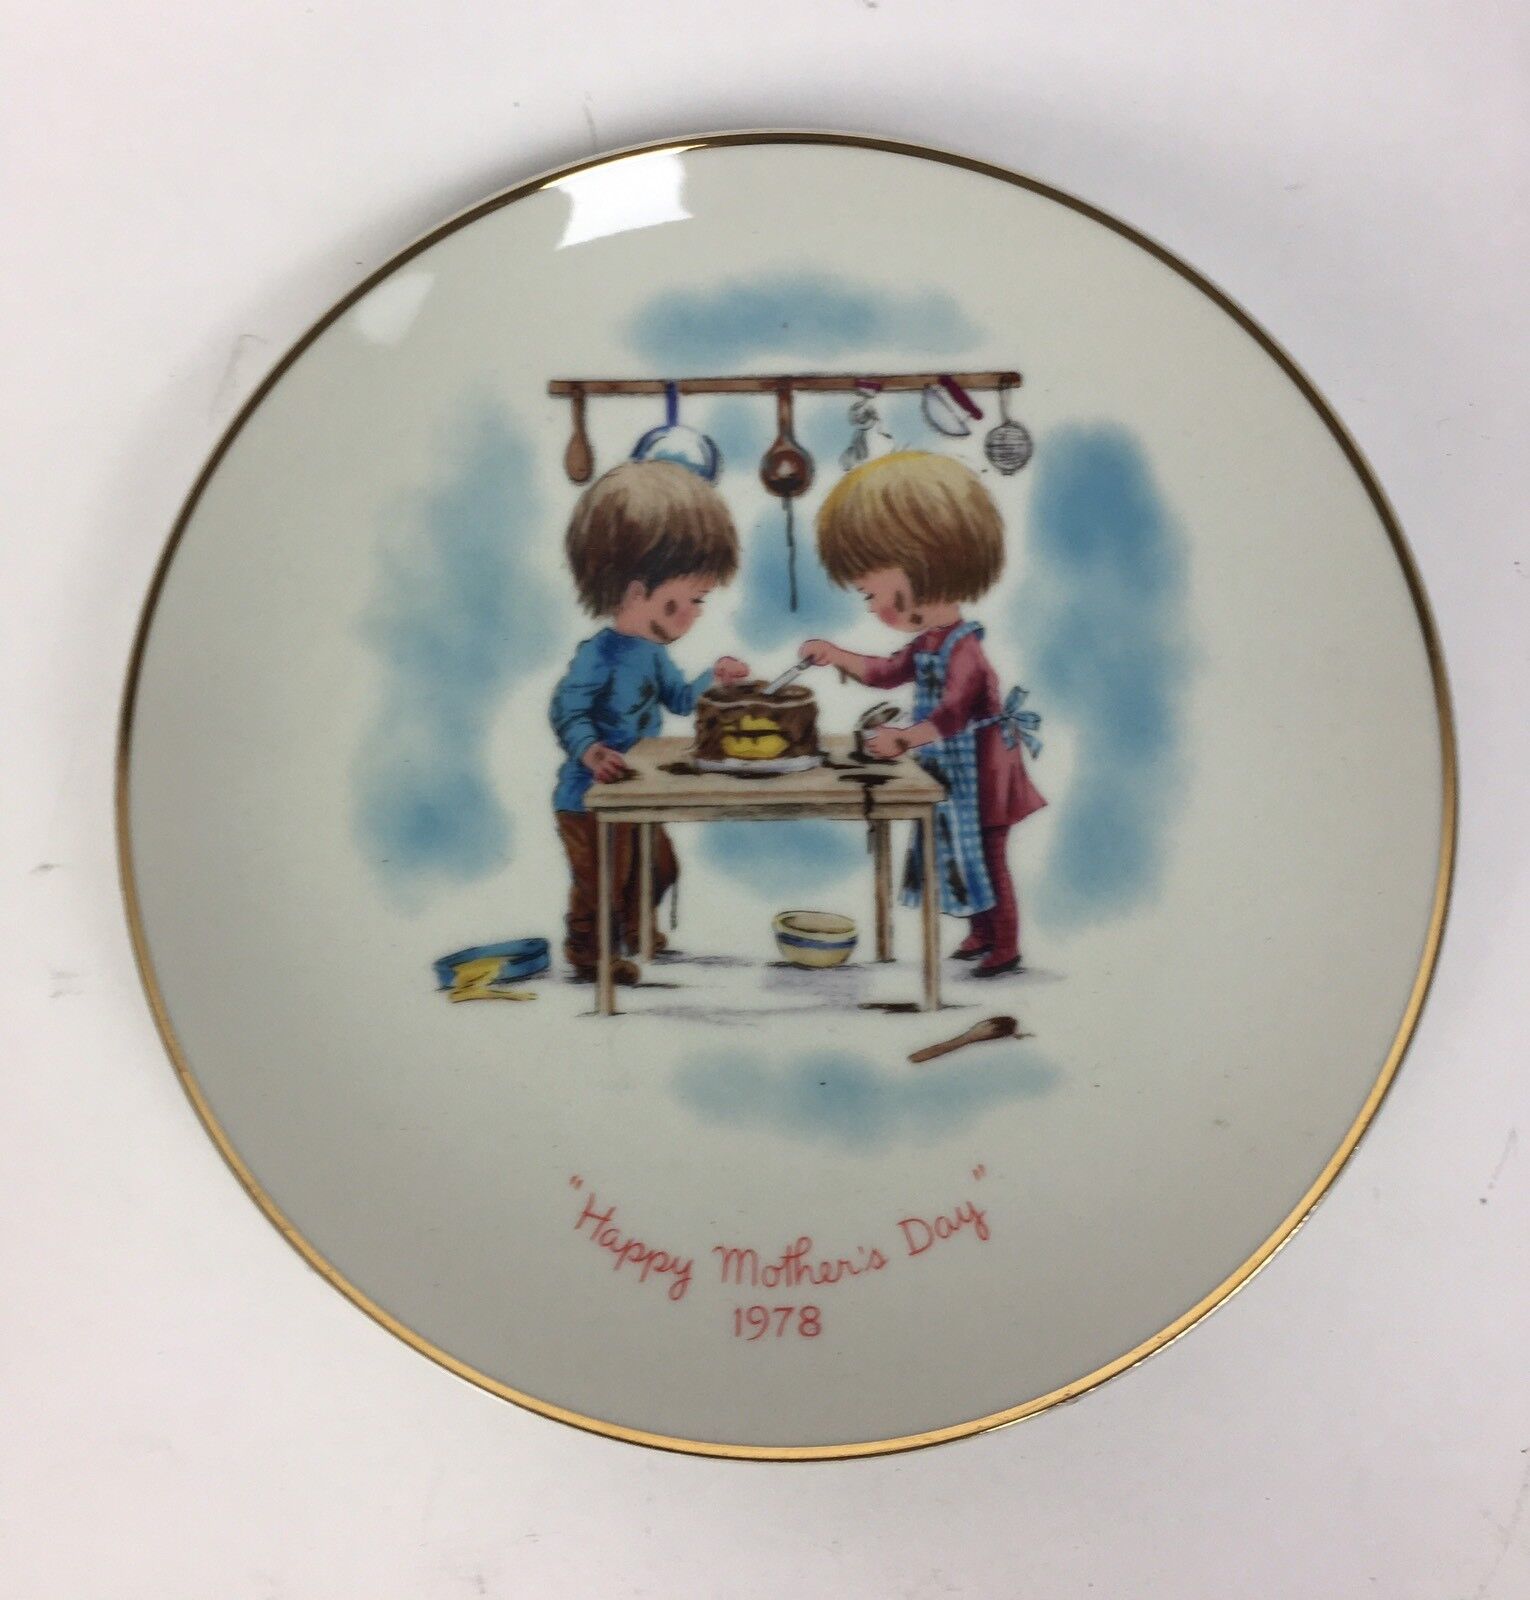 Gorham MOPPETS PLATE 1978 Happy Mothers Day 68358 - £8.11 GBP